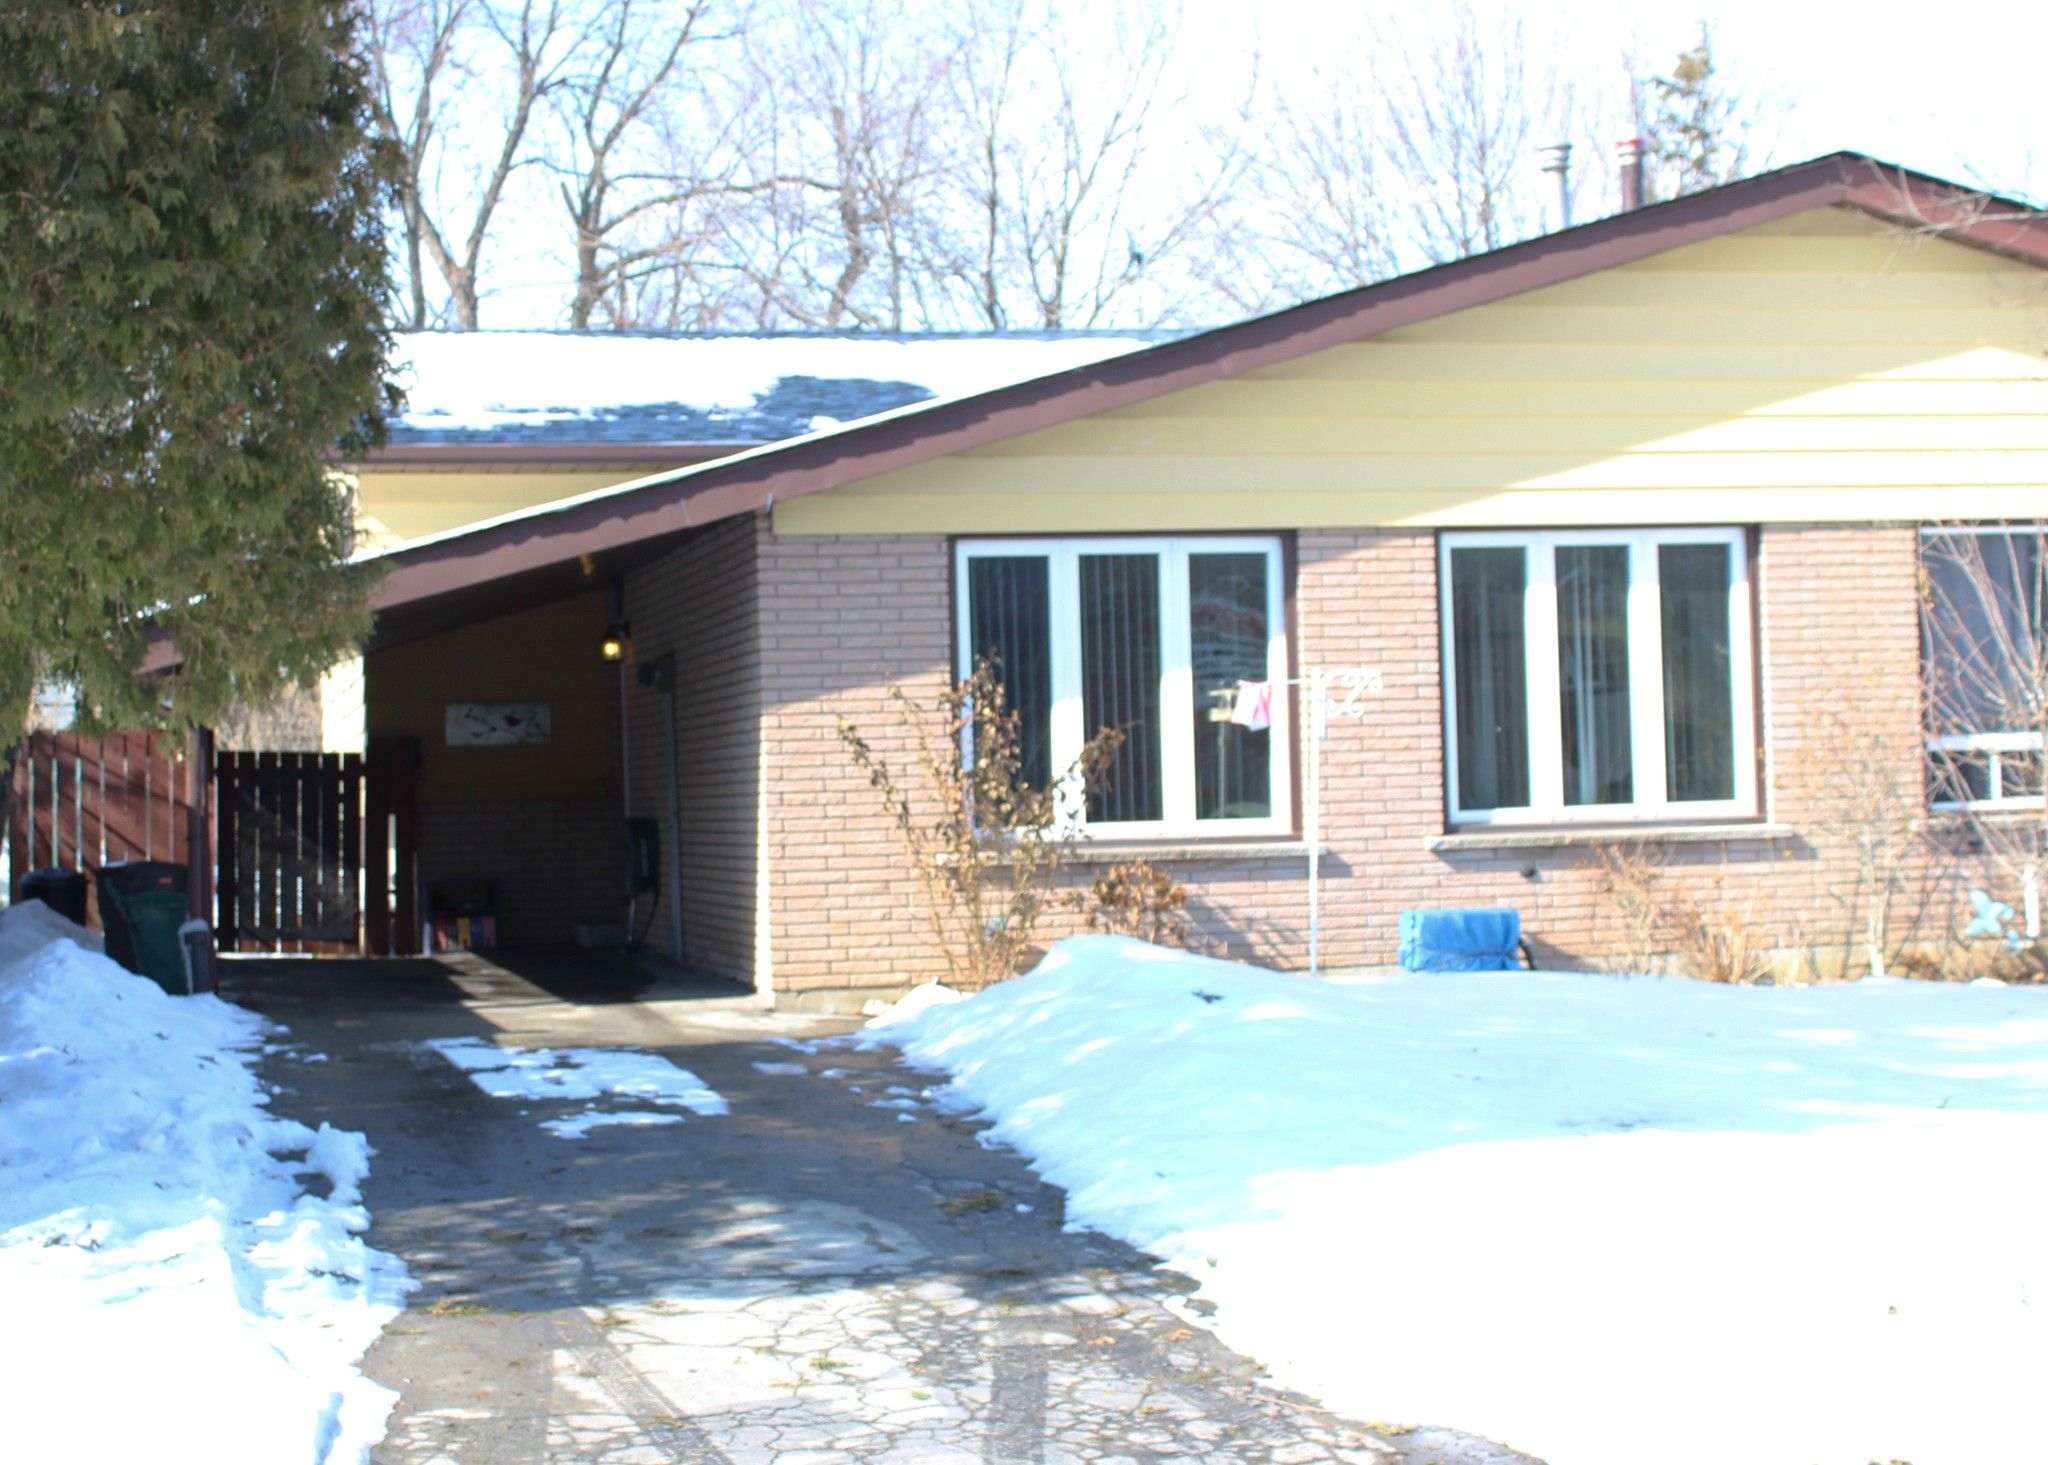 Main Photo: 9 Greendale Drive: Residential for sale (Hamilton Mountain (16))  : MLS®# H4126999